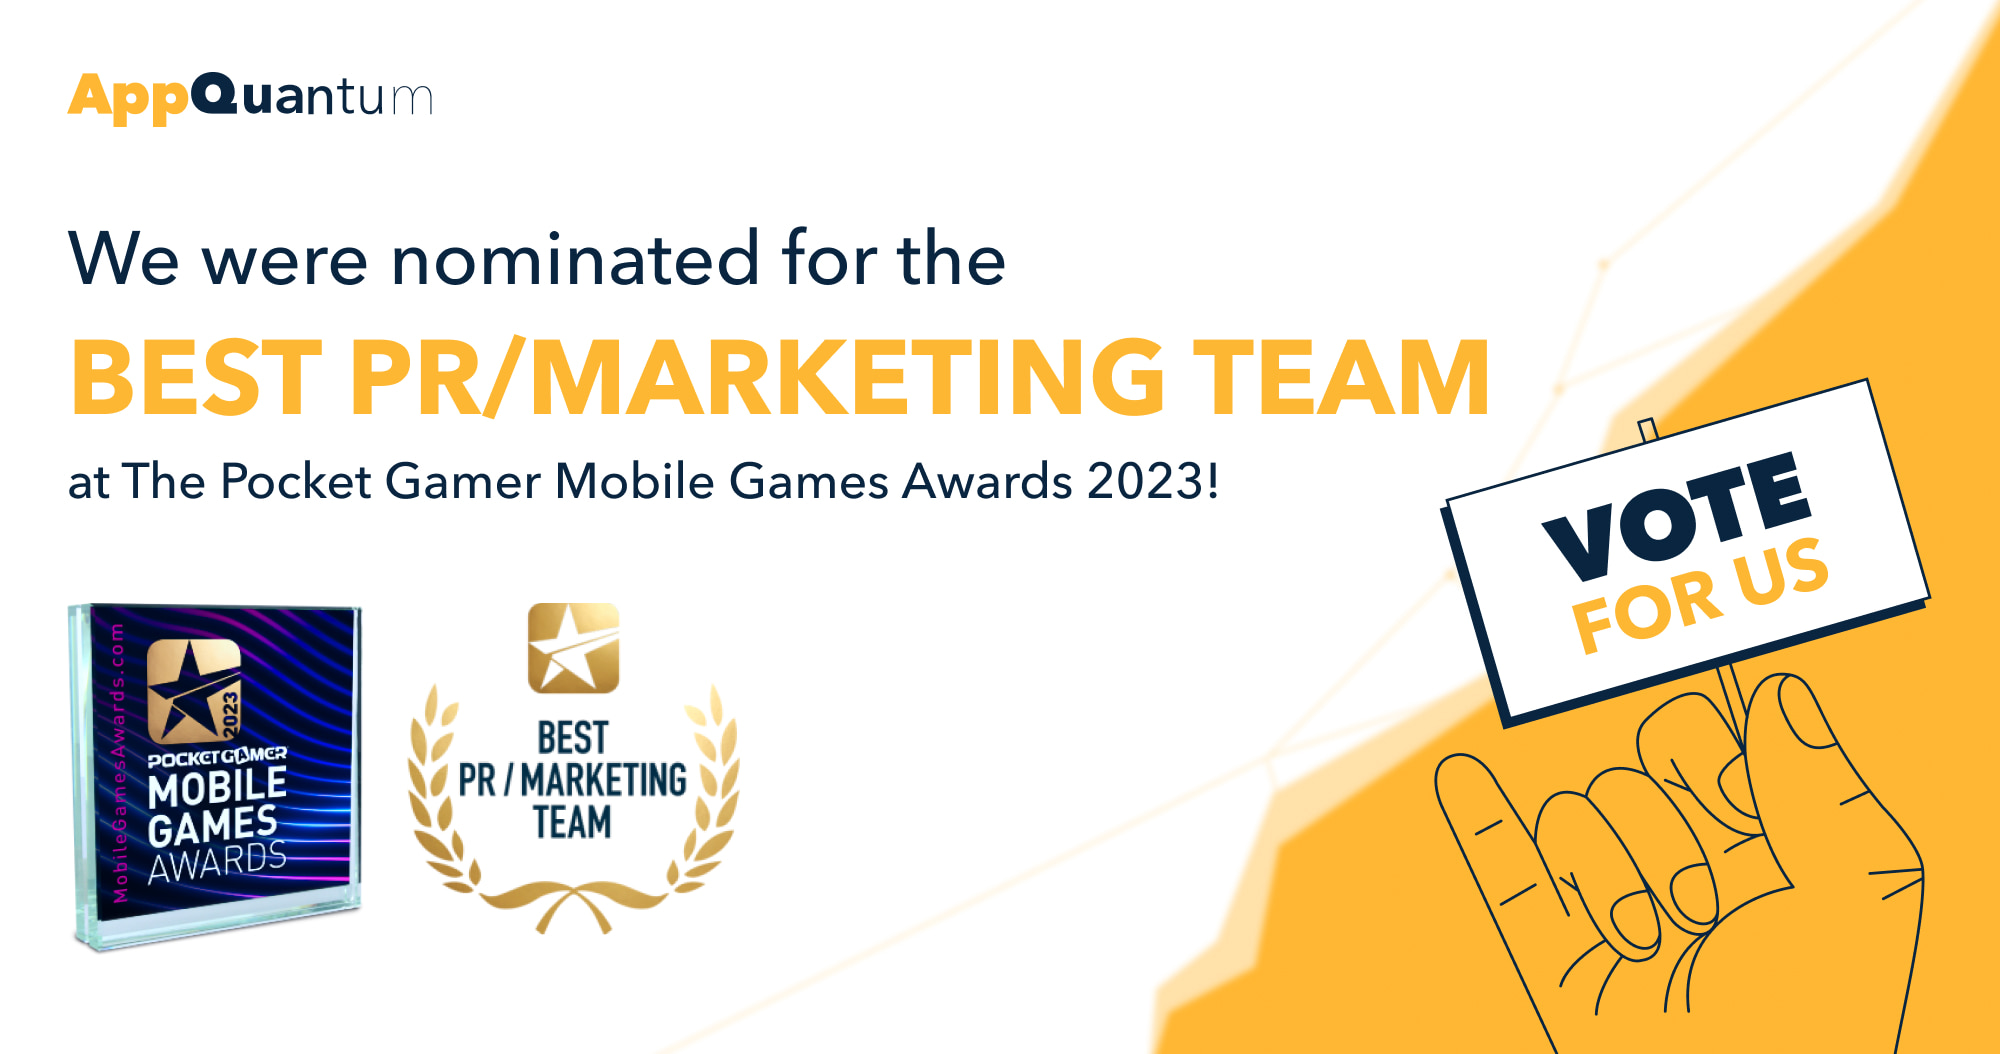 AppQuantum’s PR Department Was Nominated for the Pocket Gamer Mobile Games Awards 2023!